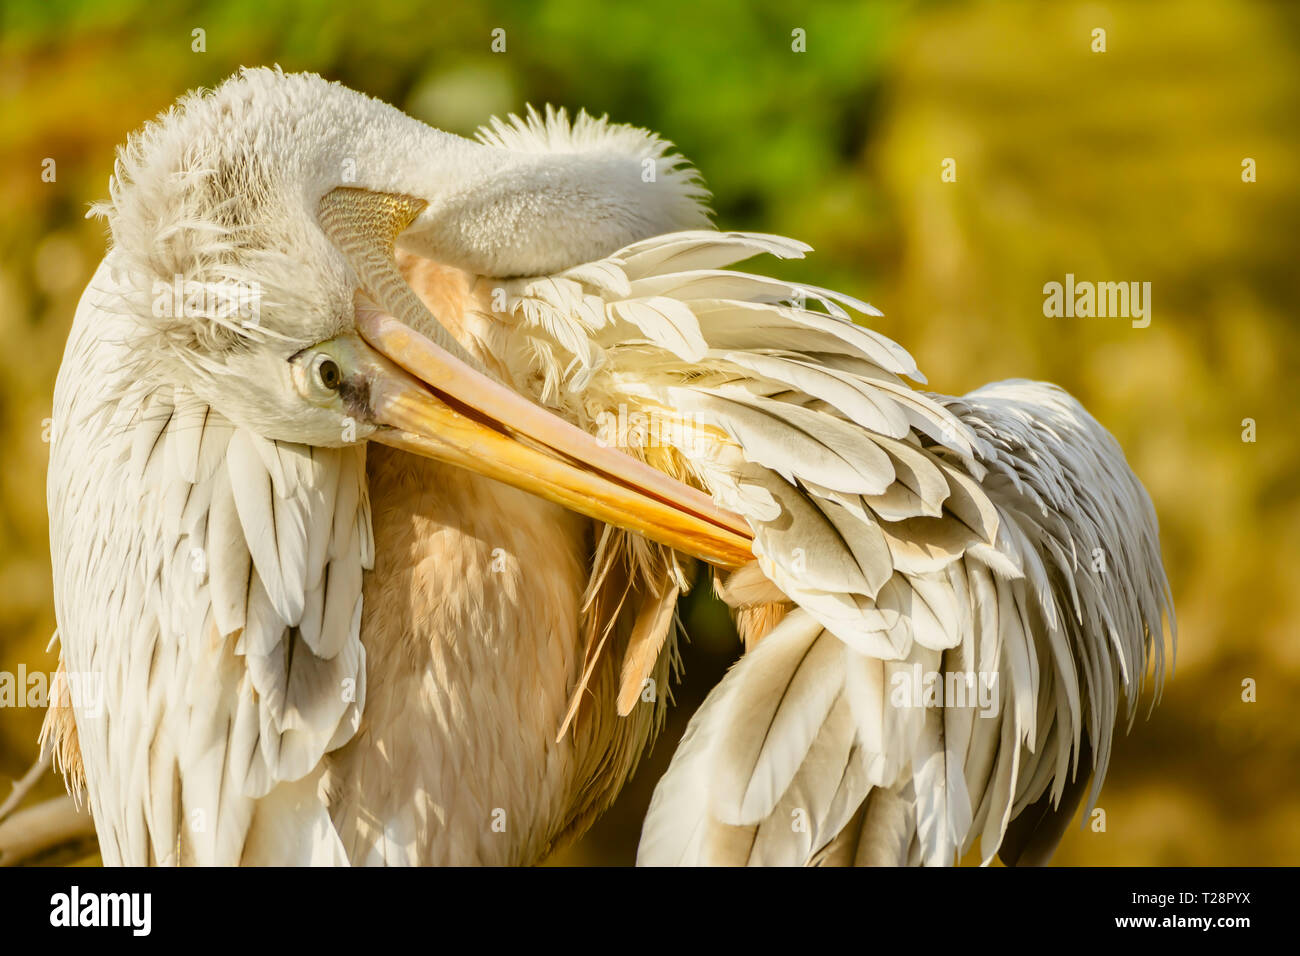 Close up, profile portrait of pelican cleaning its feathers while bowing his head.Blurred, natural background and copy space.Wildlife photography.Bird. Stock Photo